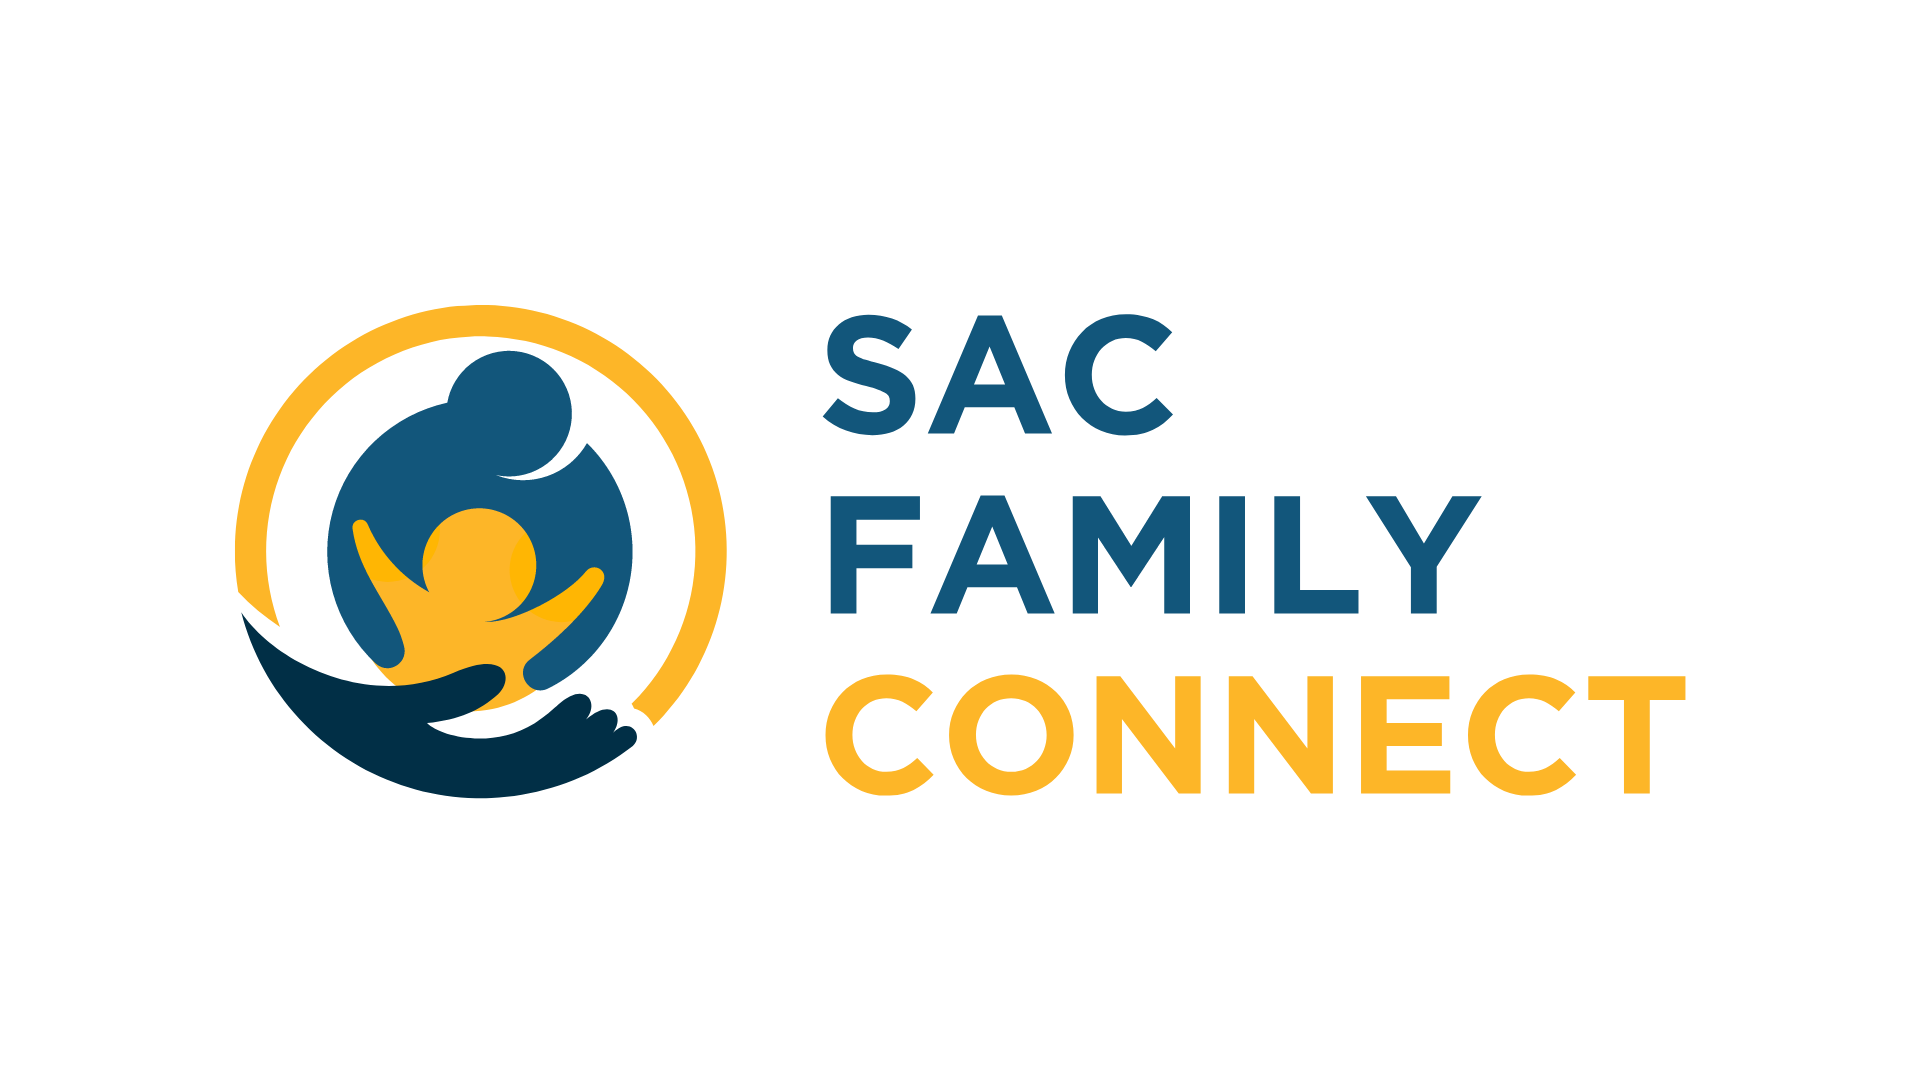 Sac Family Connect